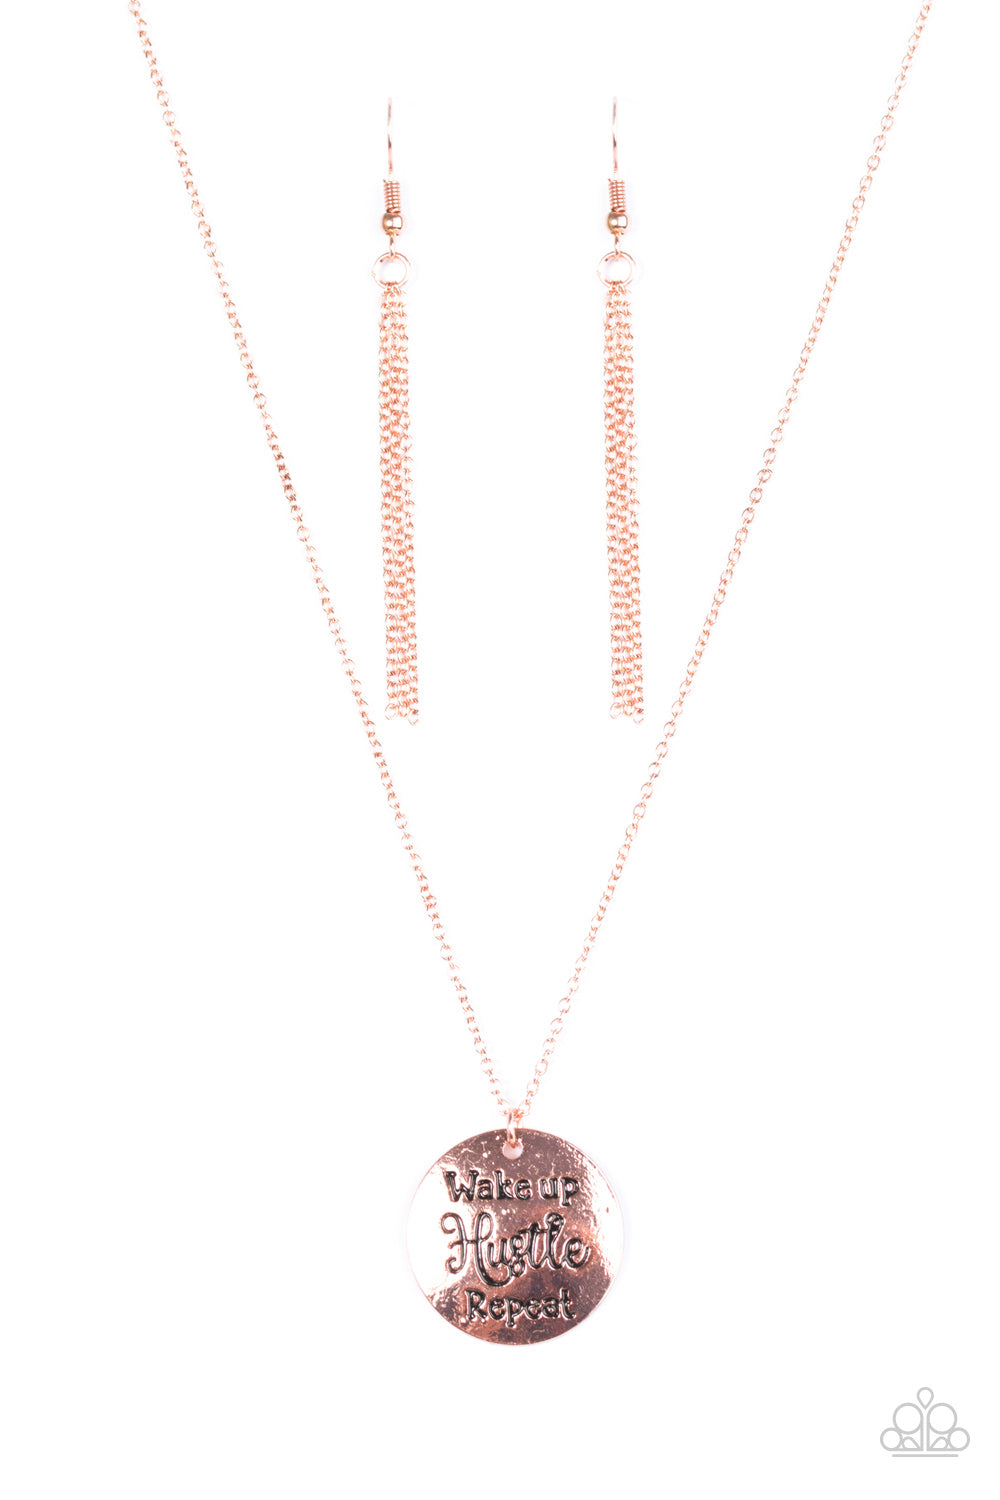 five-dollar-jewelry-hustle-on-repeat-copper-necklace-paparazzi-accessories